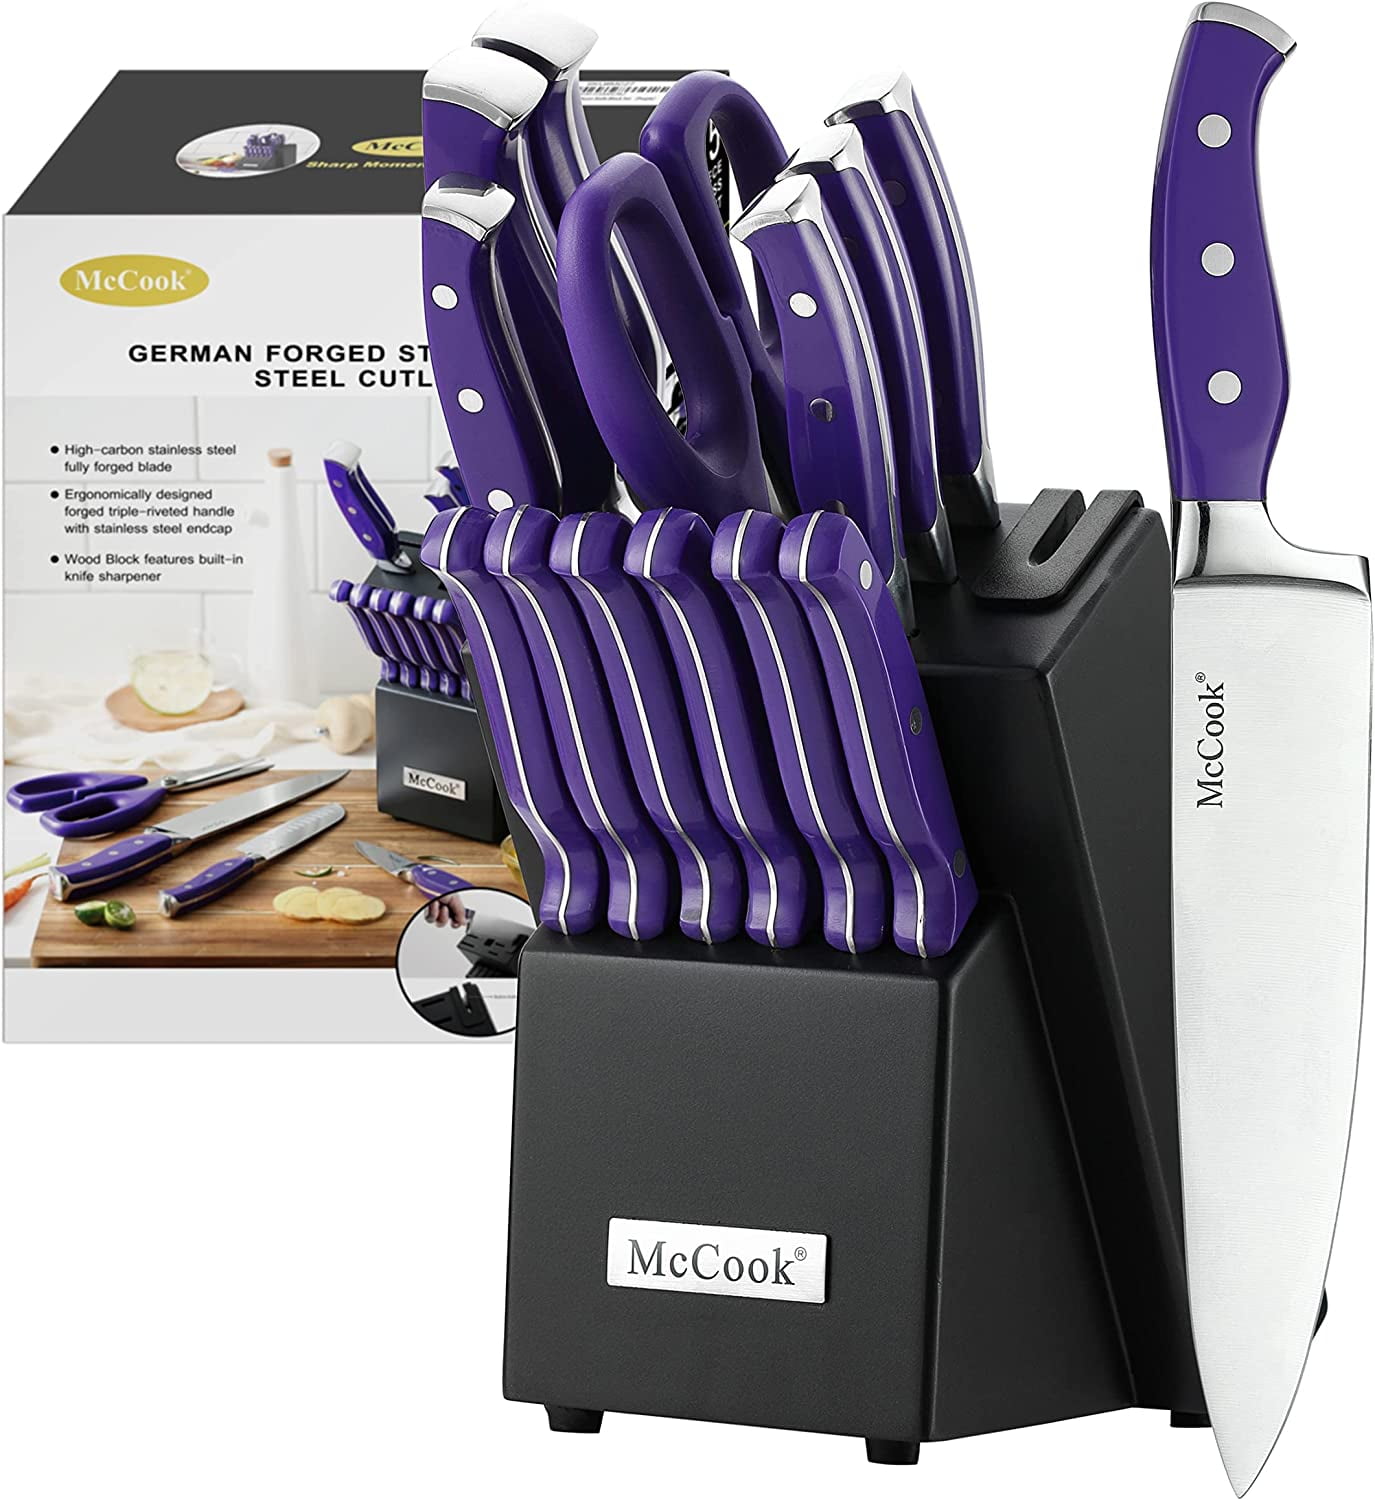 This15-piece knife set with a block and built-in sharpener is now reduced  by 20% to just $40